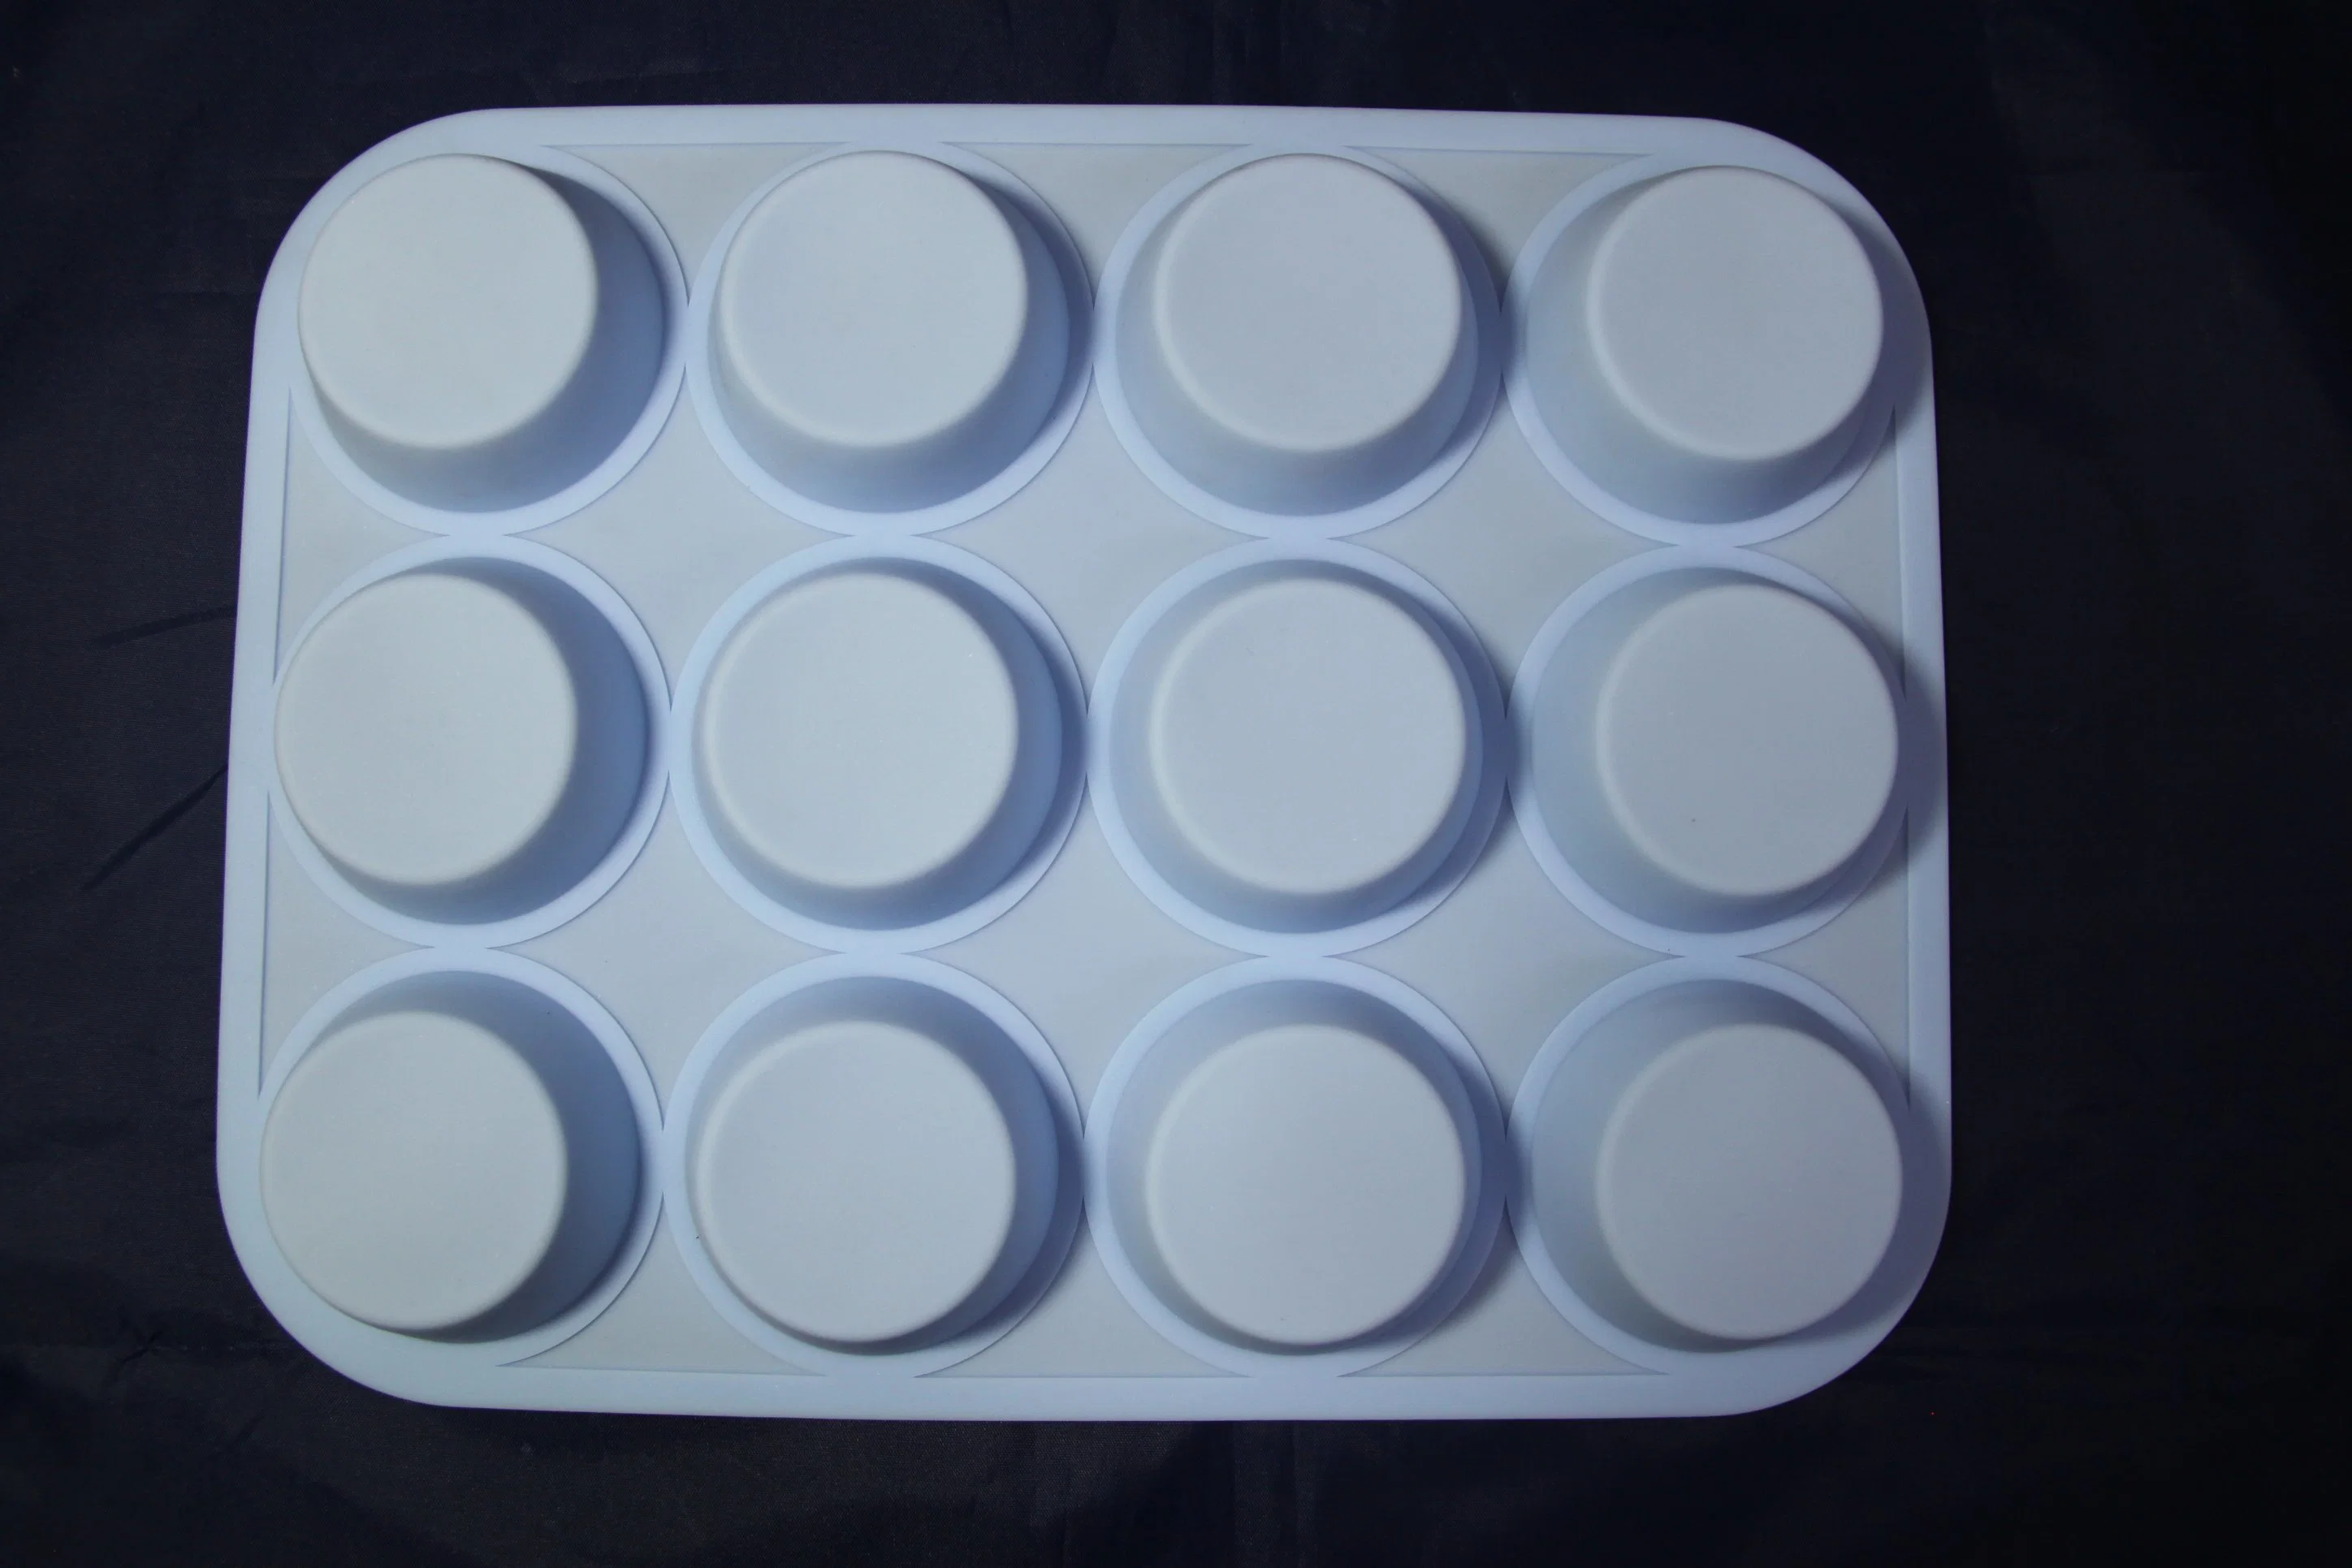 Bakeware Silicone Square 12 Round Cups Style Bake Cake or Jelly Mould Mold